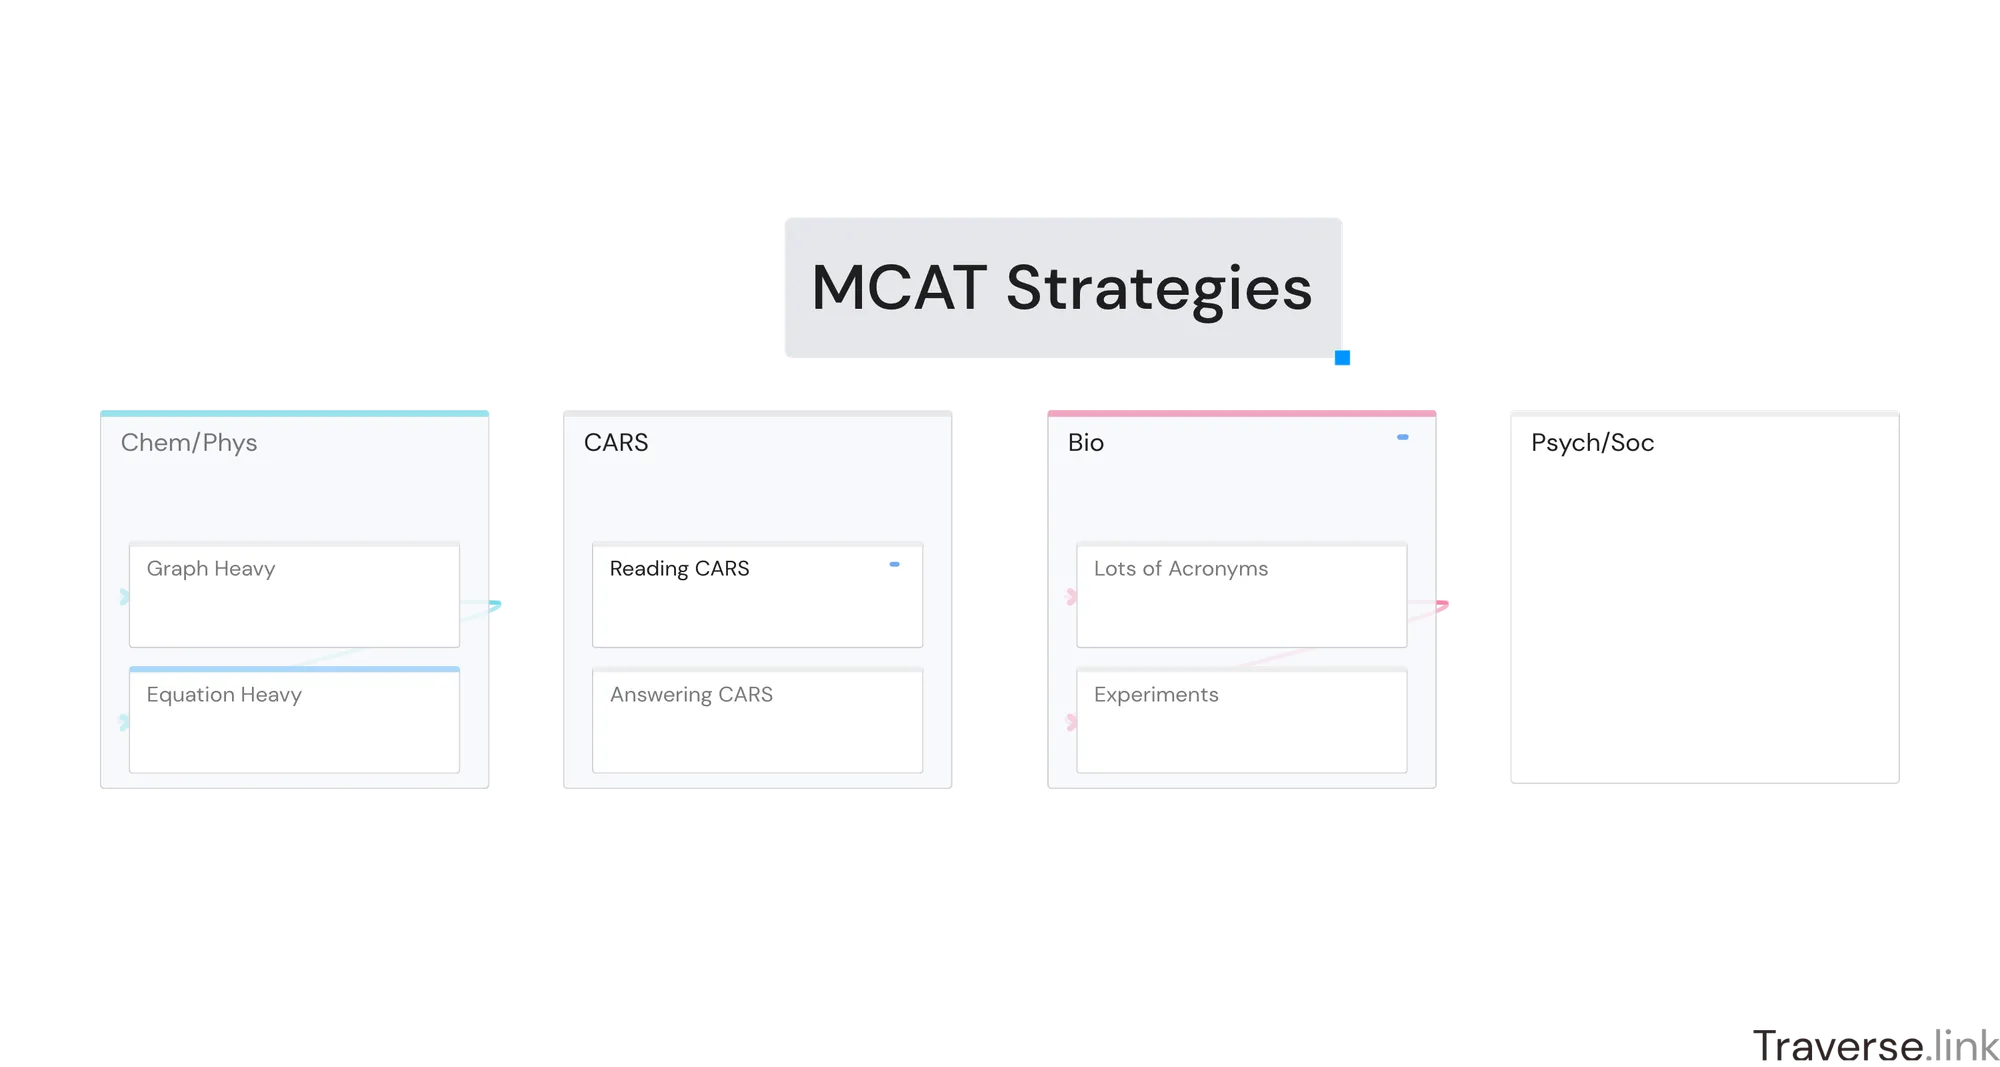 Raleigh’s MCAT strategies (view in detail here: https://traverse.link/dominiczijlstra/yhuu98ta2y64m23r7kdxo2fq/?showMap=1)